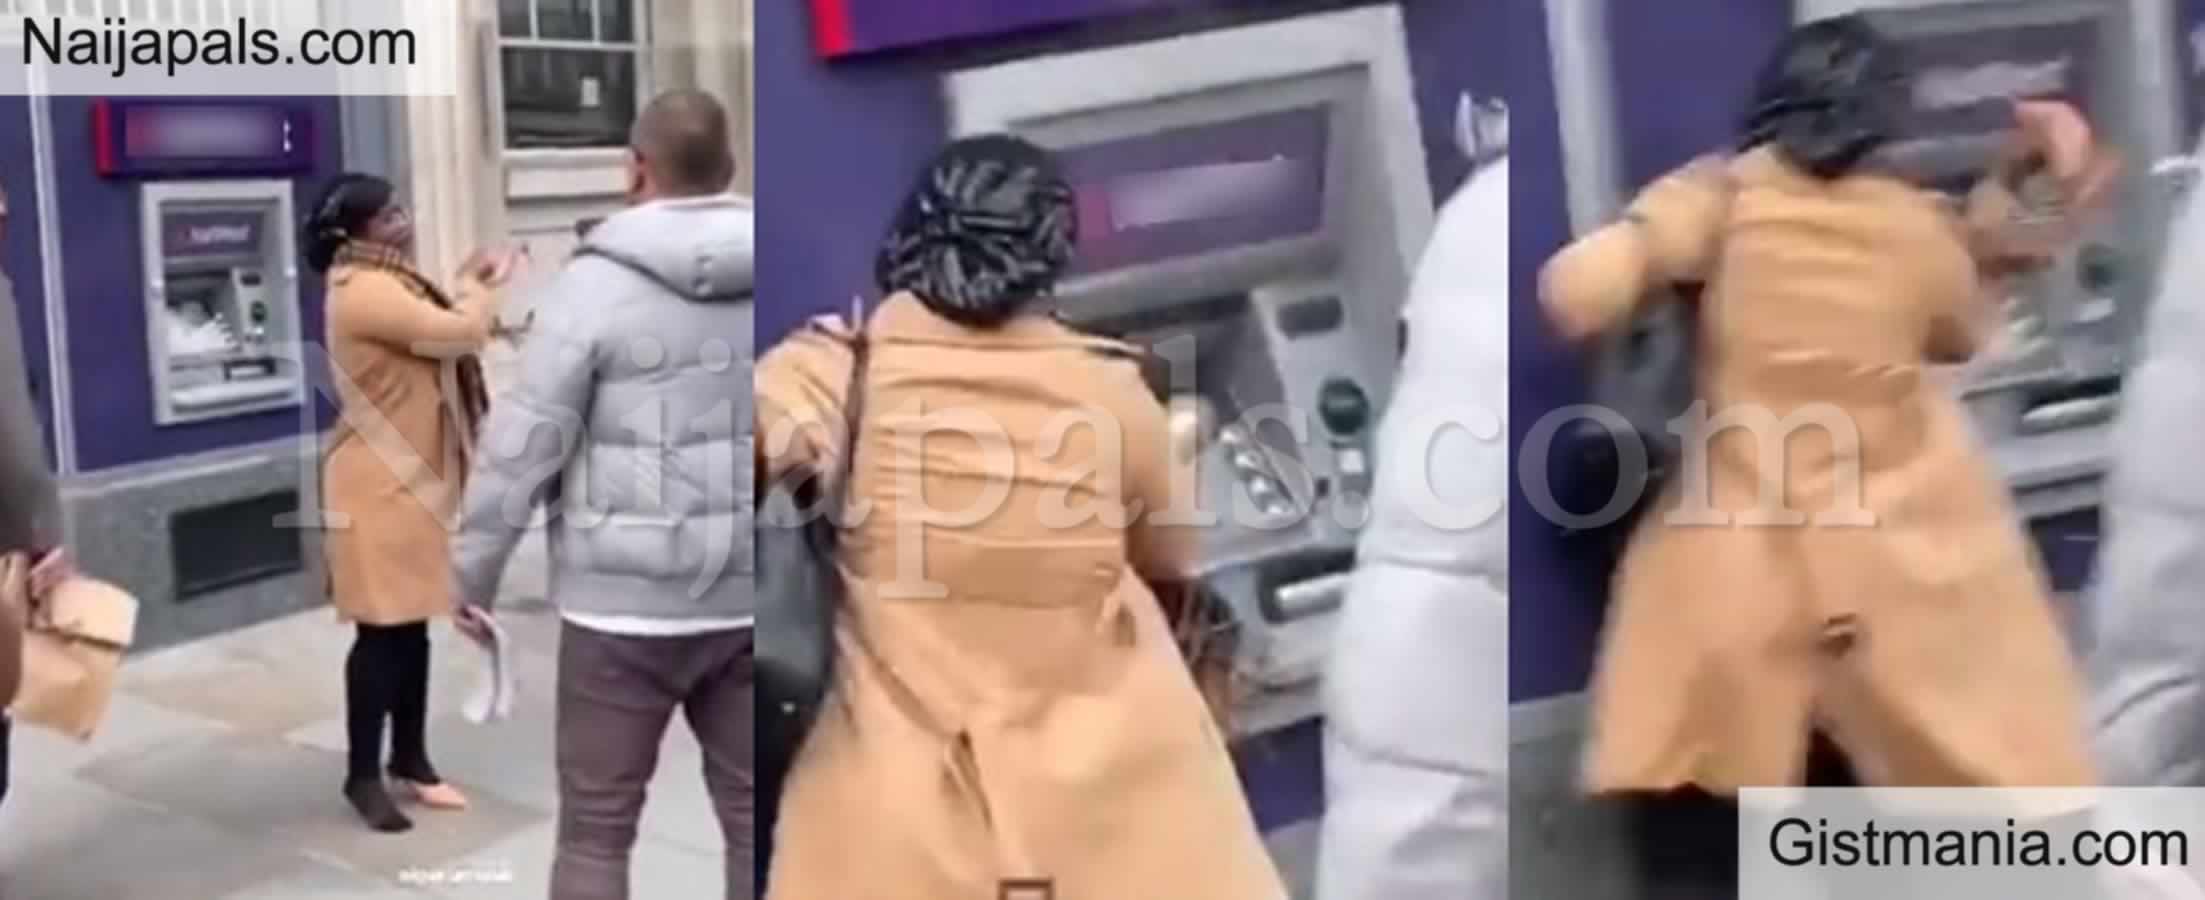 <img alt='.' class='lazyload' data-src='https://img.gistmania.com/emot/video.gif' /> <b>Nigerian Cause Scene After Using Her Shoe To Damage ATM In UK</b> (VIDEO)